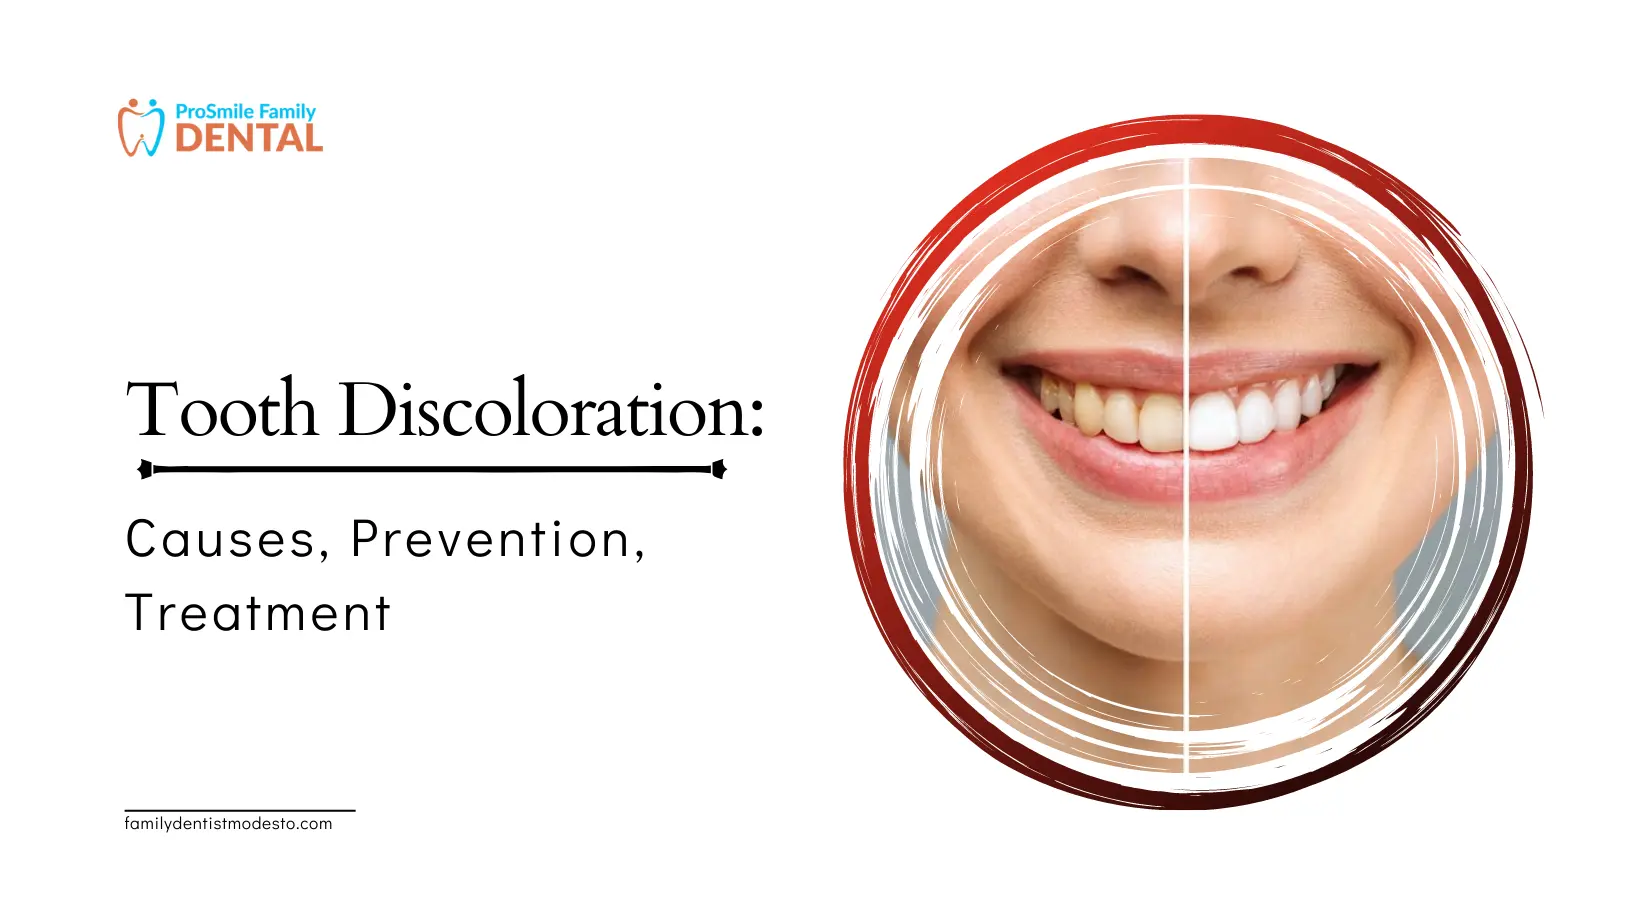 Tooth Discoloration - Causes, Prevention, Treatment